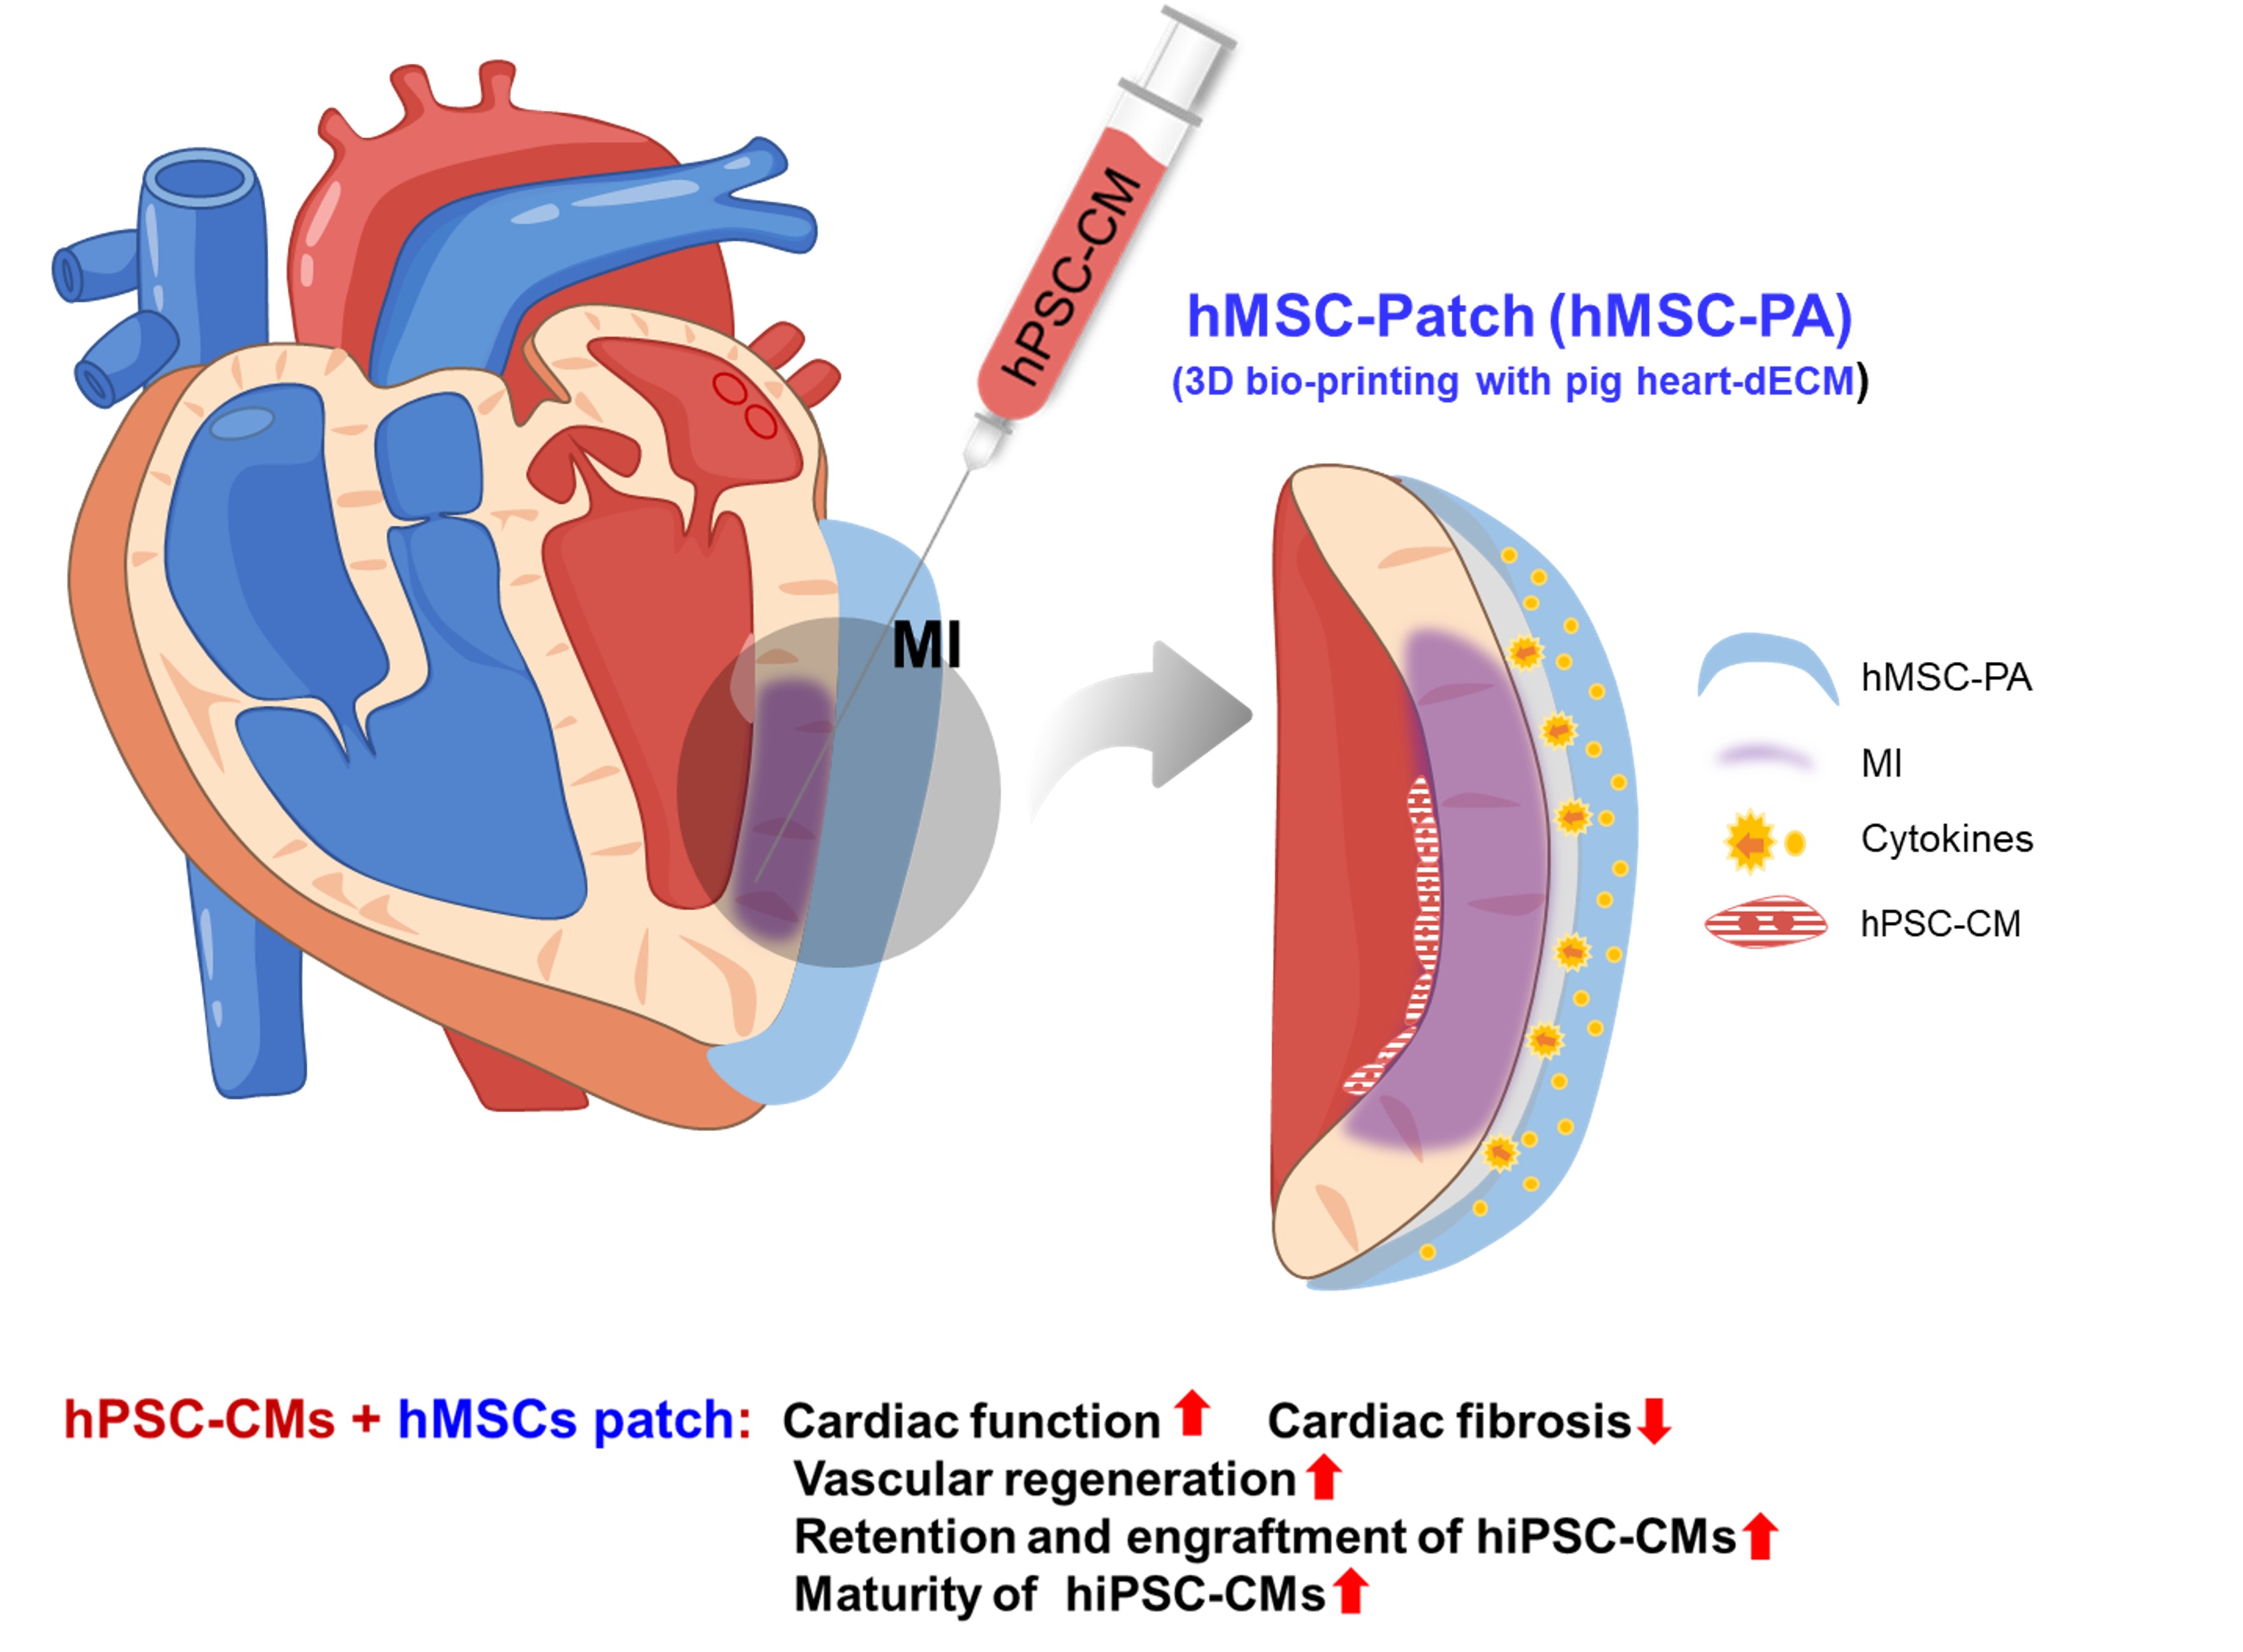 Scientists develop Novel Stem Cell Therapy for Cardiac Regeneration in MI